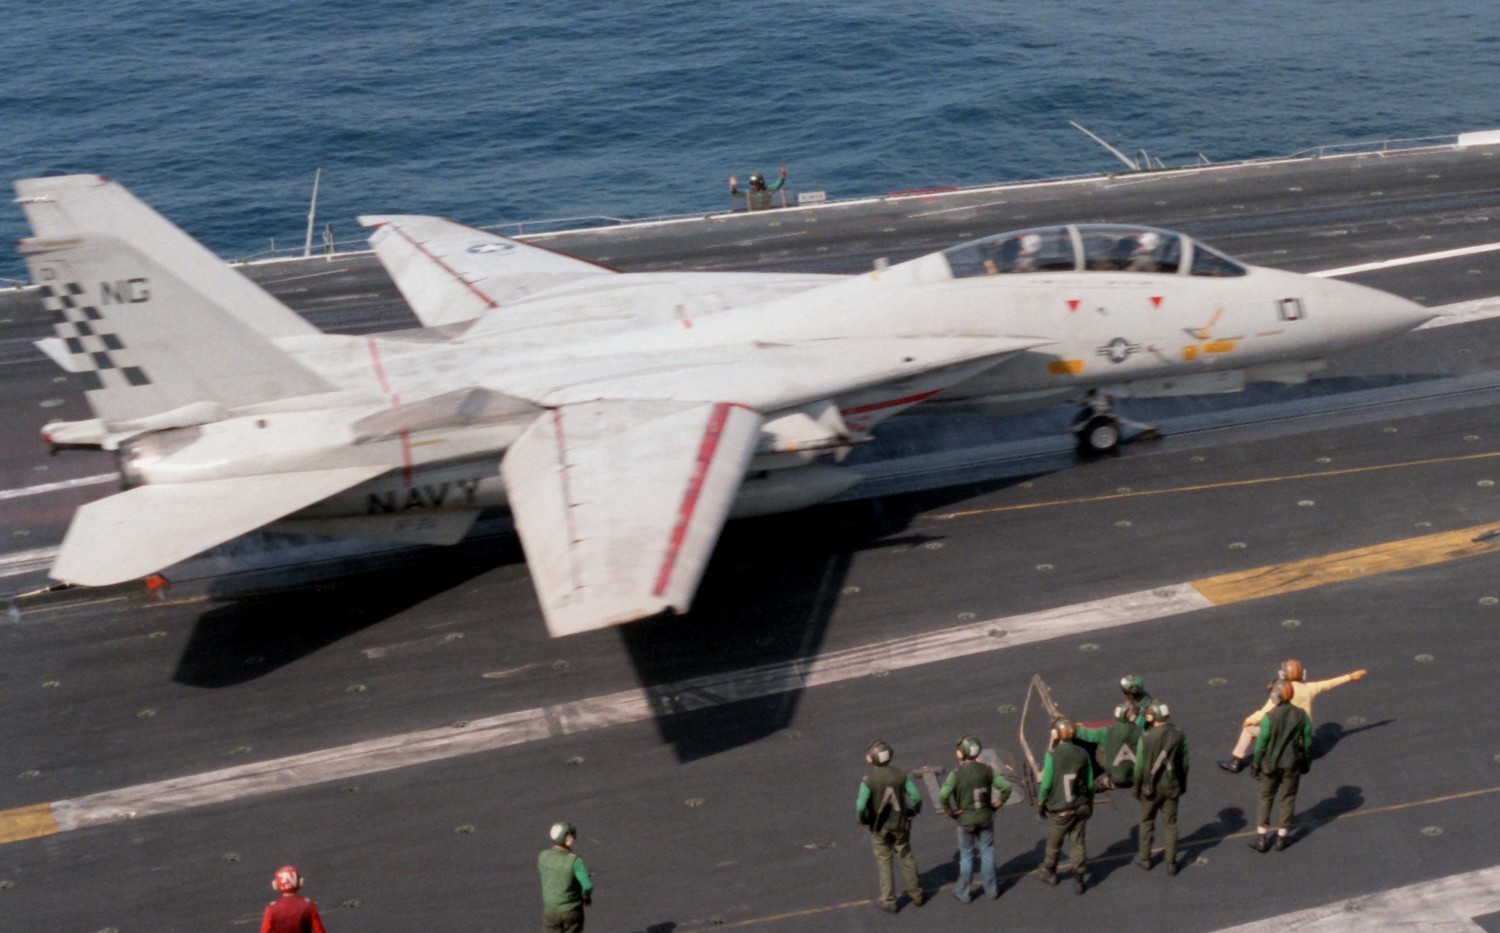 vf-211 fighting checkmates fighter squadron f-14a tomcat us navy carrier air wing cvw-9 uss kitty hawk cv-63 74